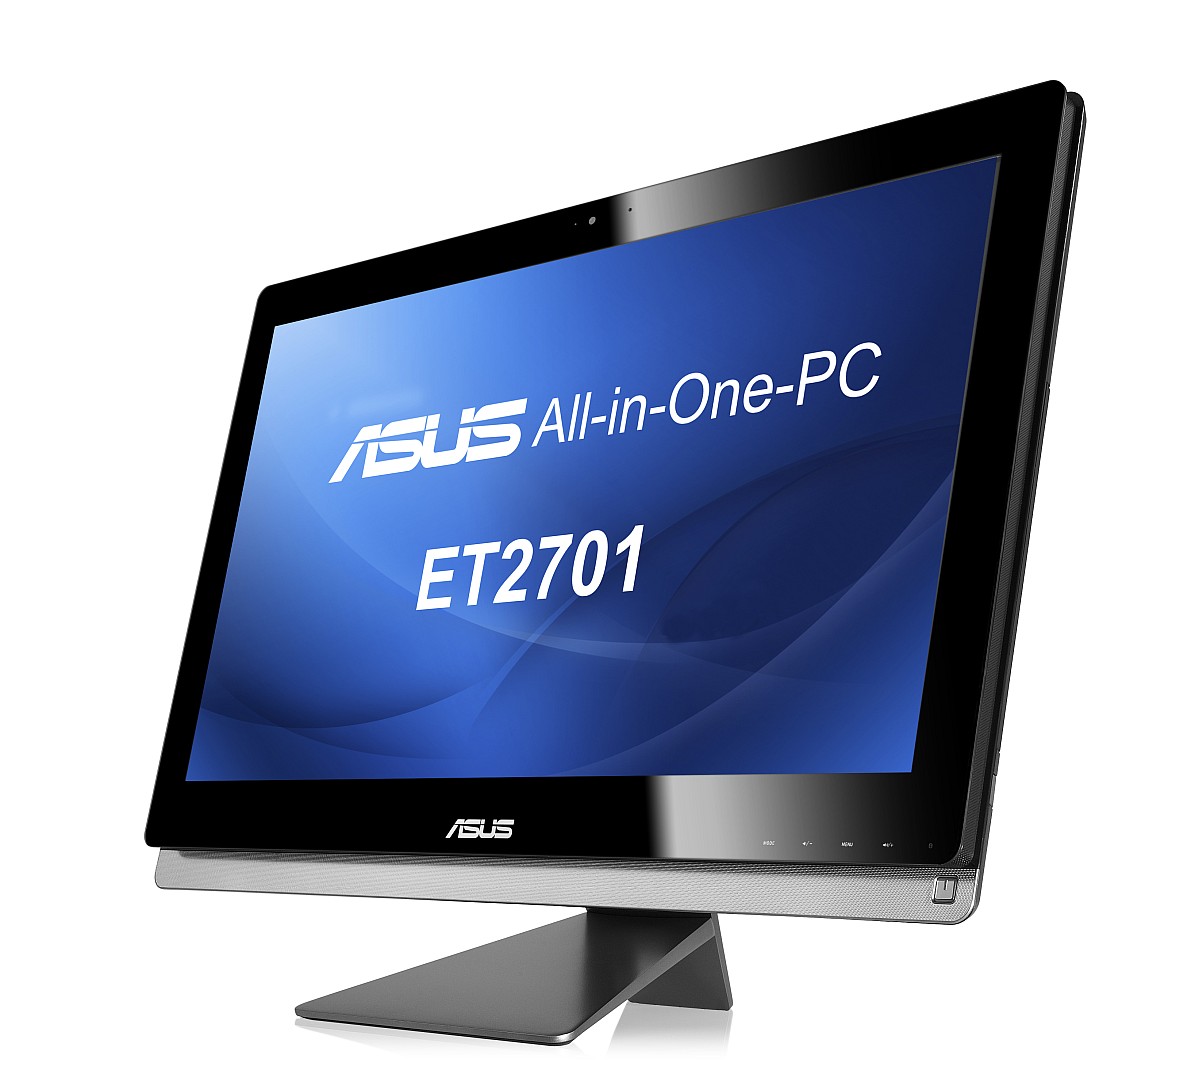 ASUS_ET2701_All-in-One_PC_Profile